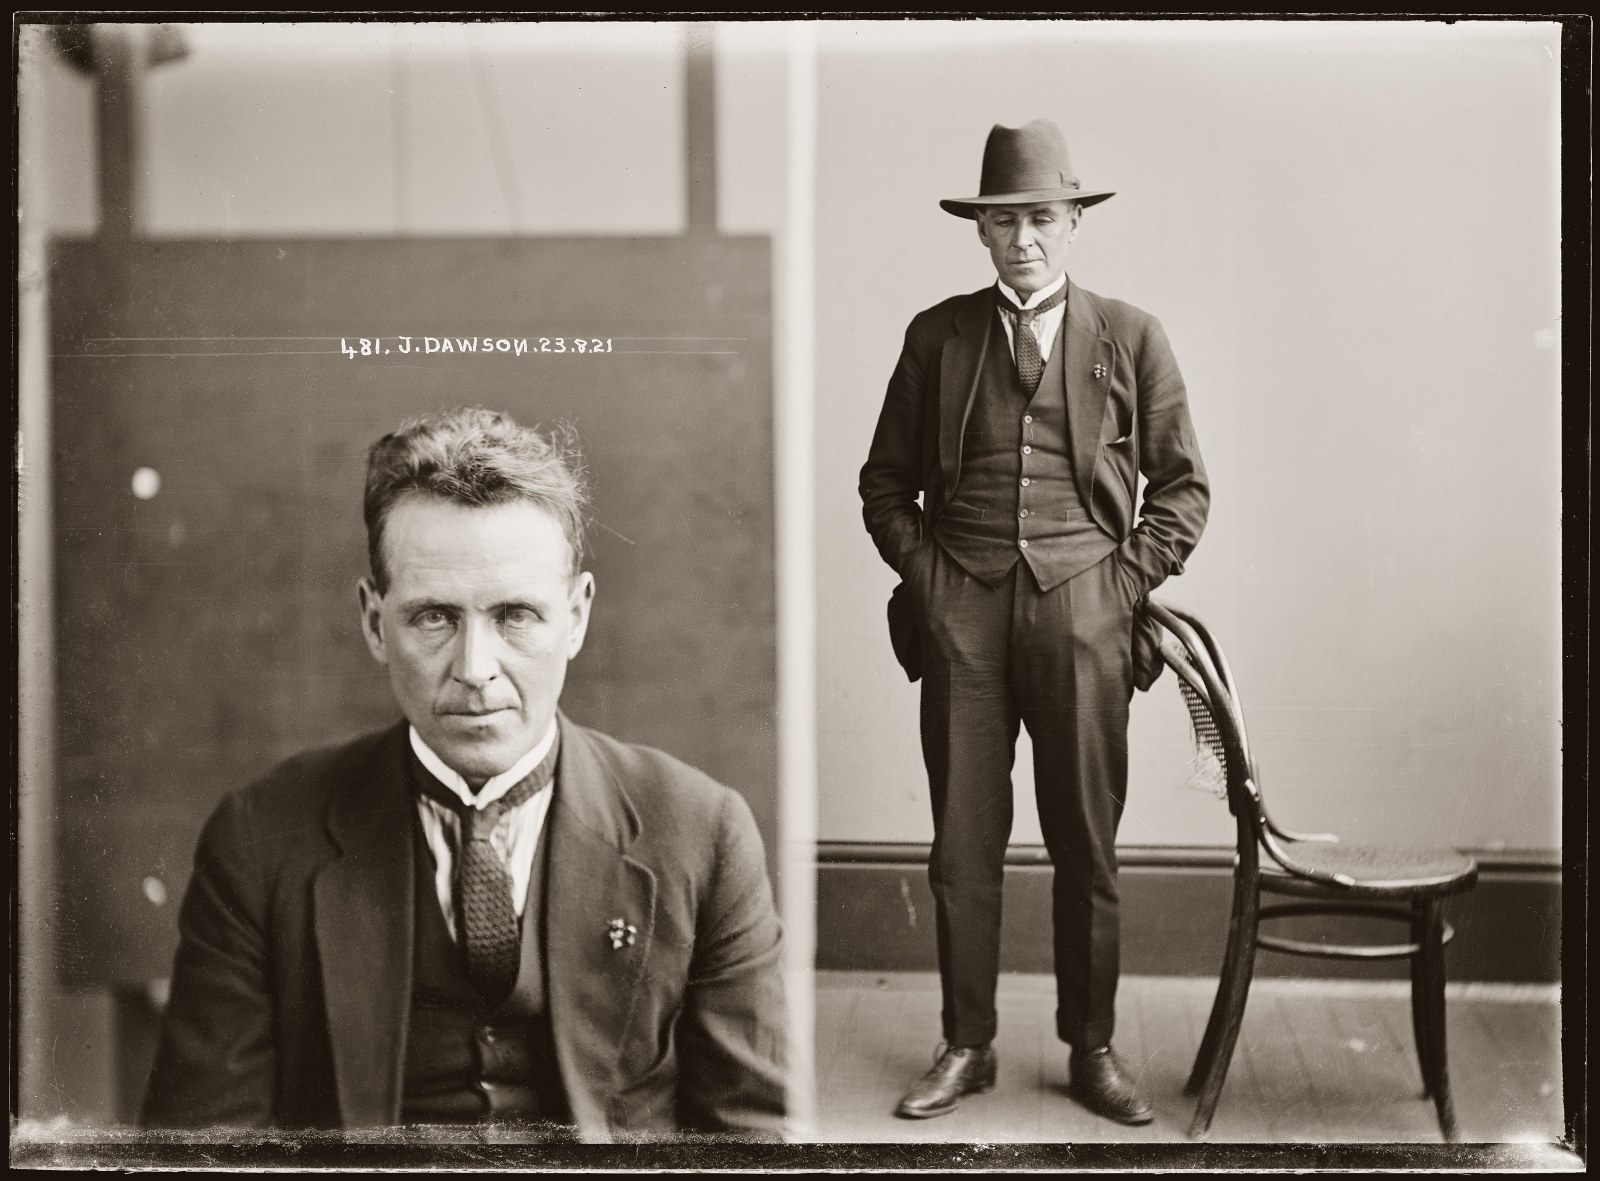 John Dawson, Special Photograph number 481, 23 August 1921, location unknown (possibly Darlinghurst Police Station) 